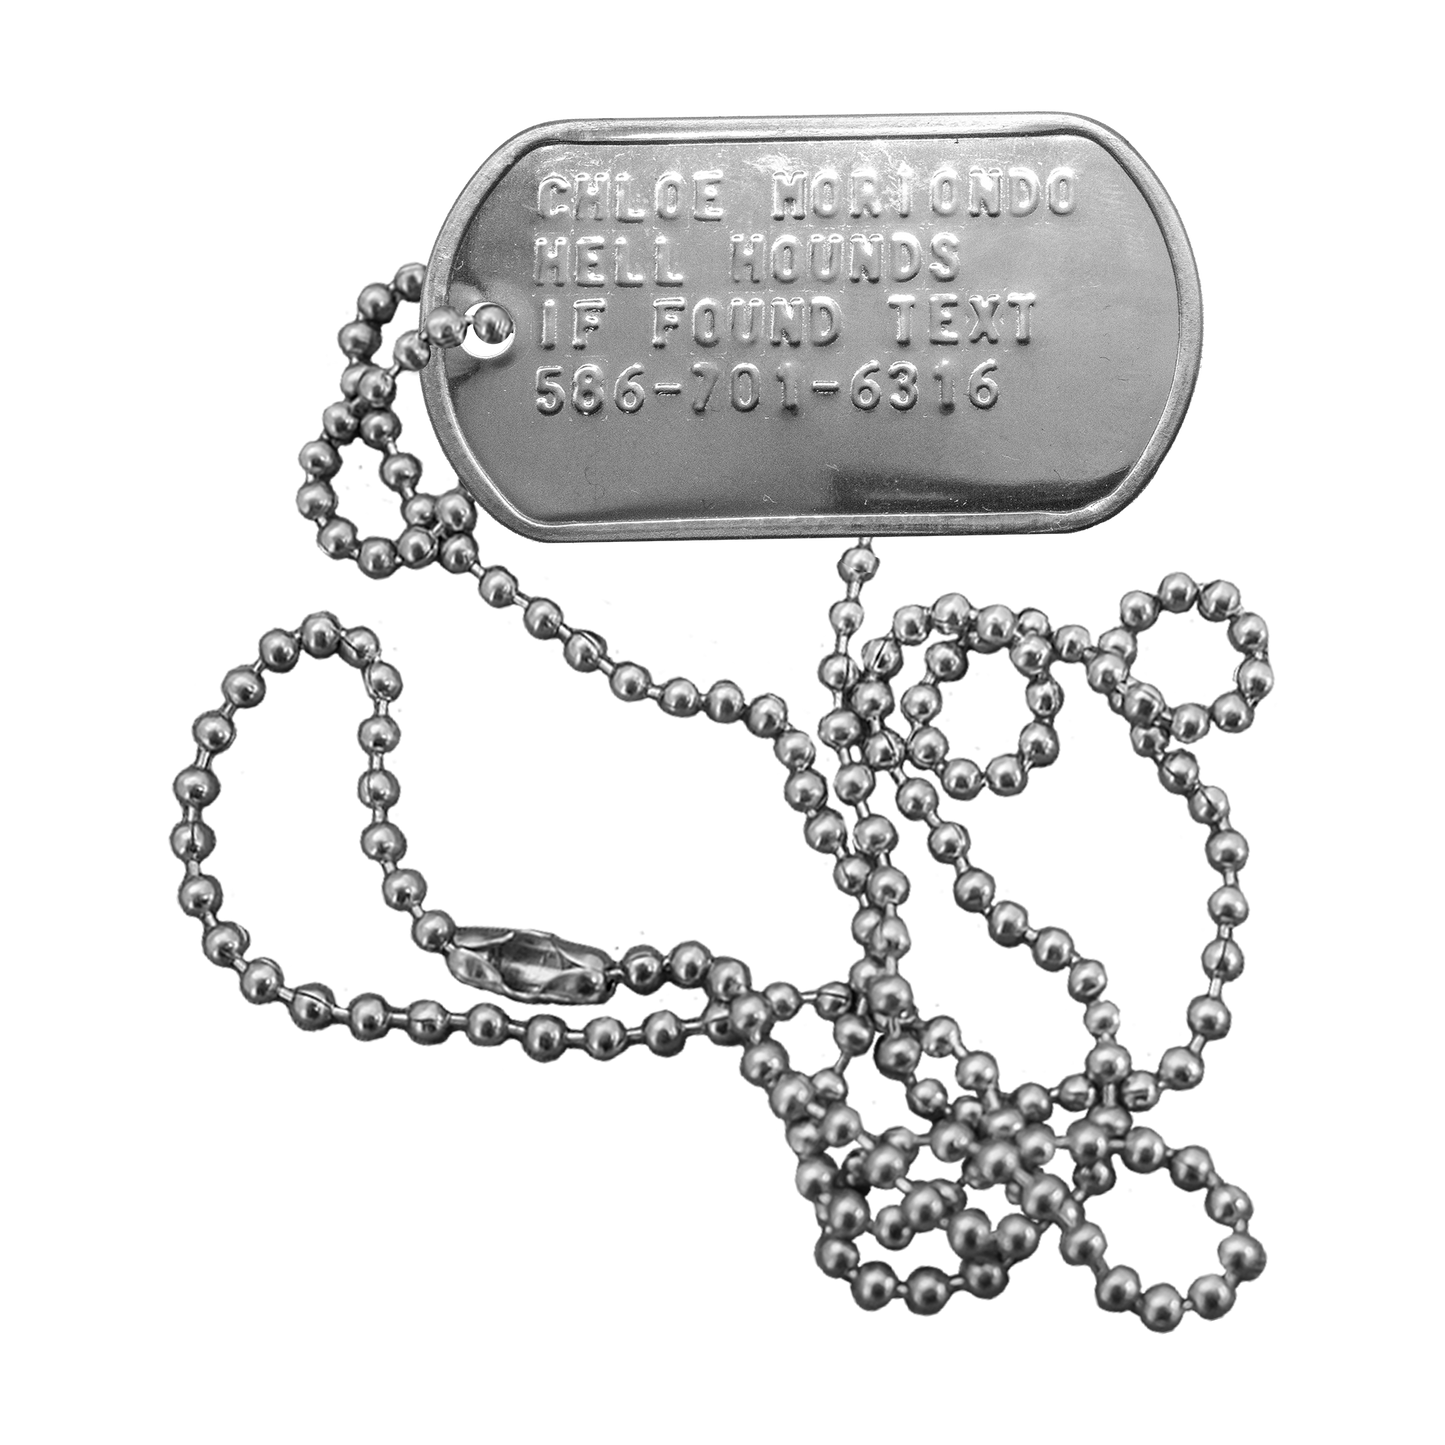 Hell Hounds Dog Tag